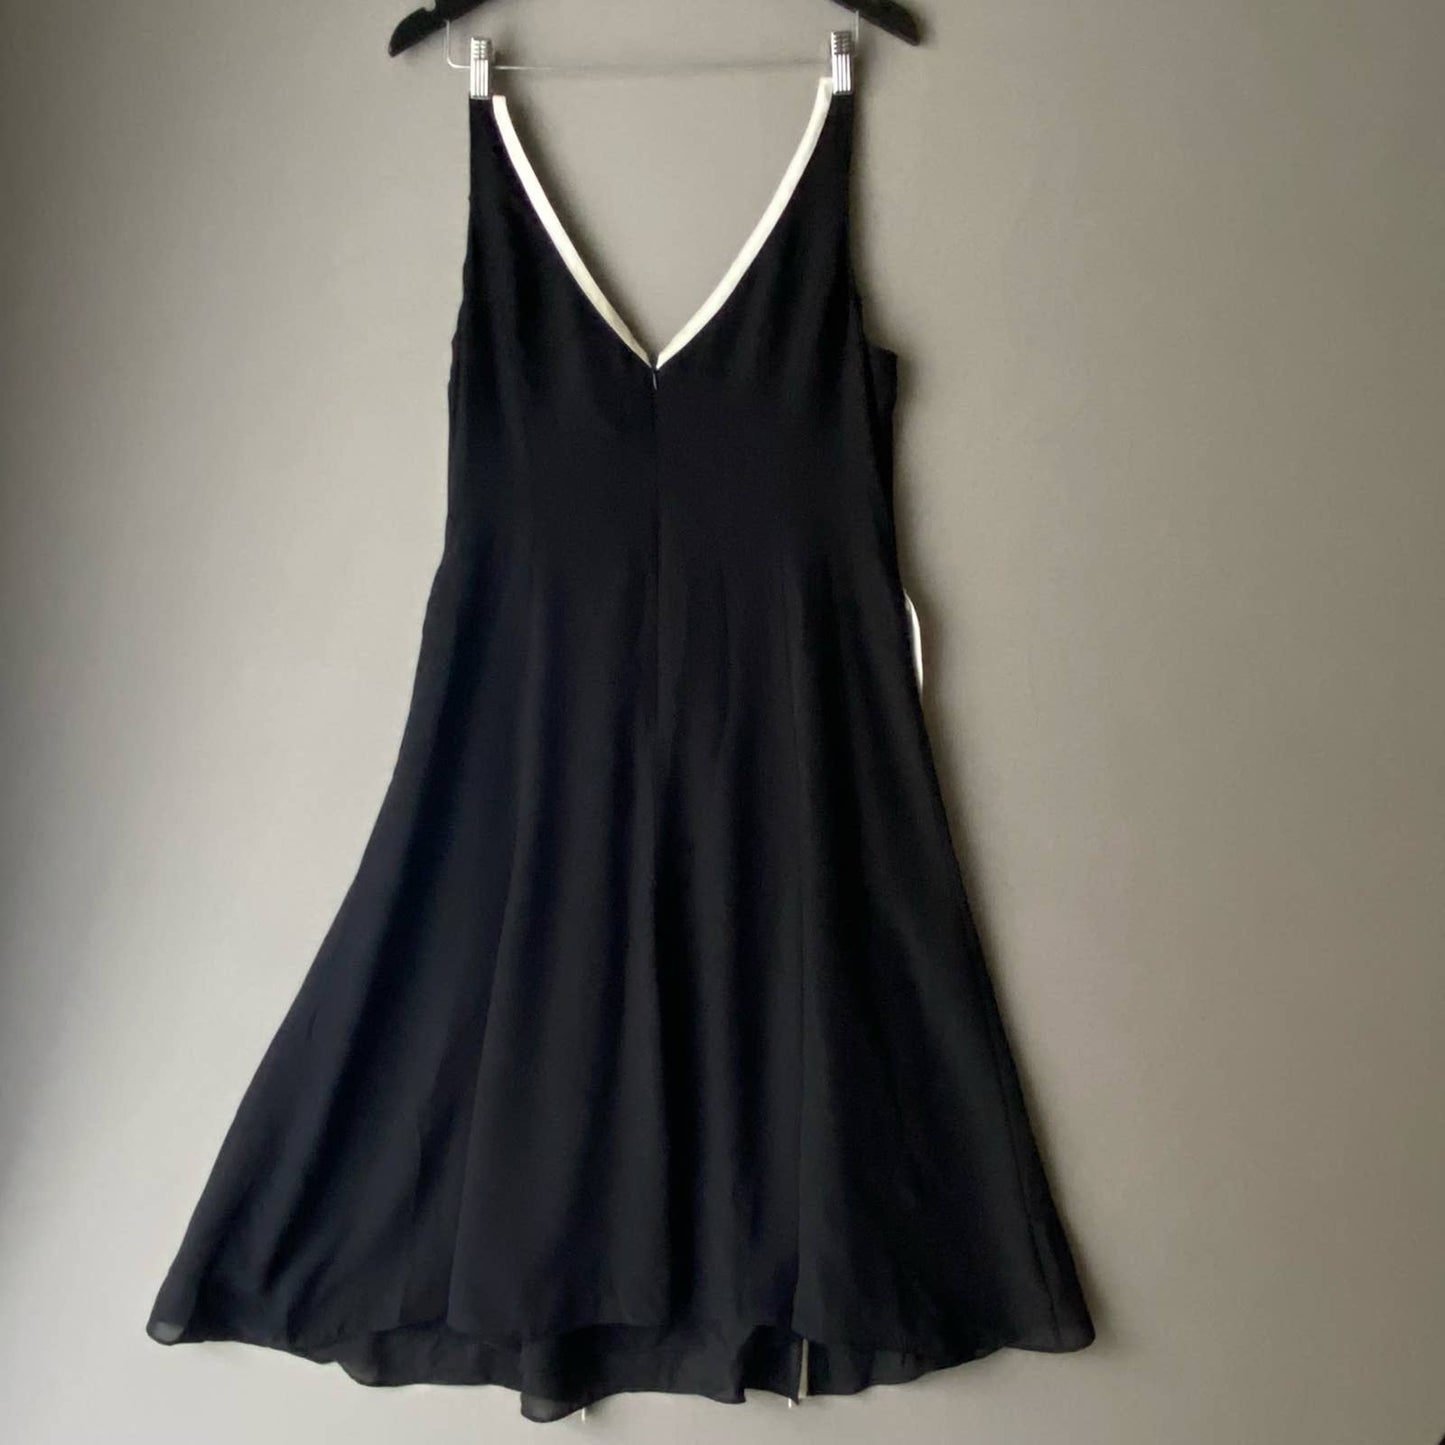 Adrianna Papell sz 12 A-line sheath 40's inspired cocktail dress